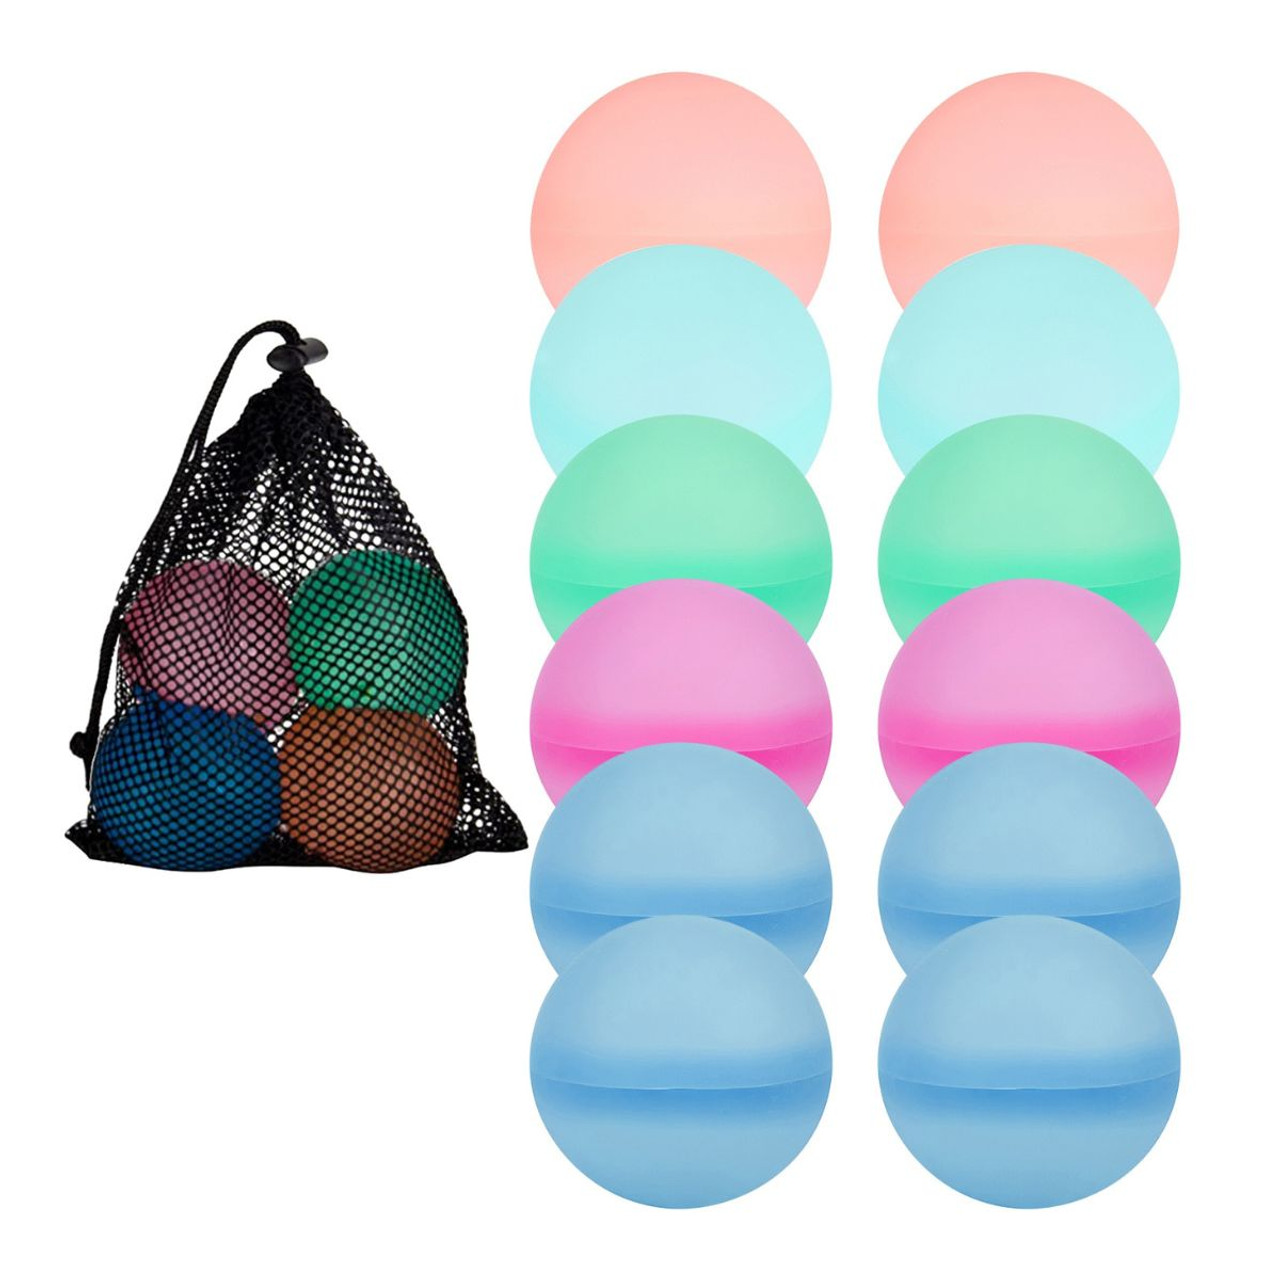 12-Piece Reusable Water Balloons by CoolWorld™ product image